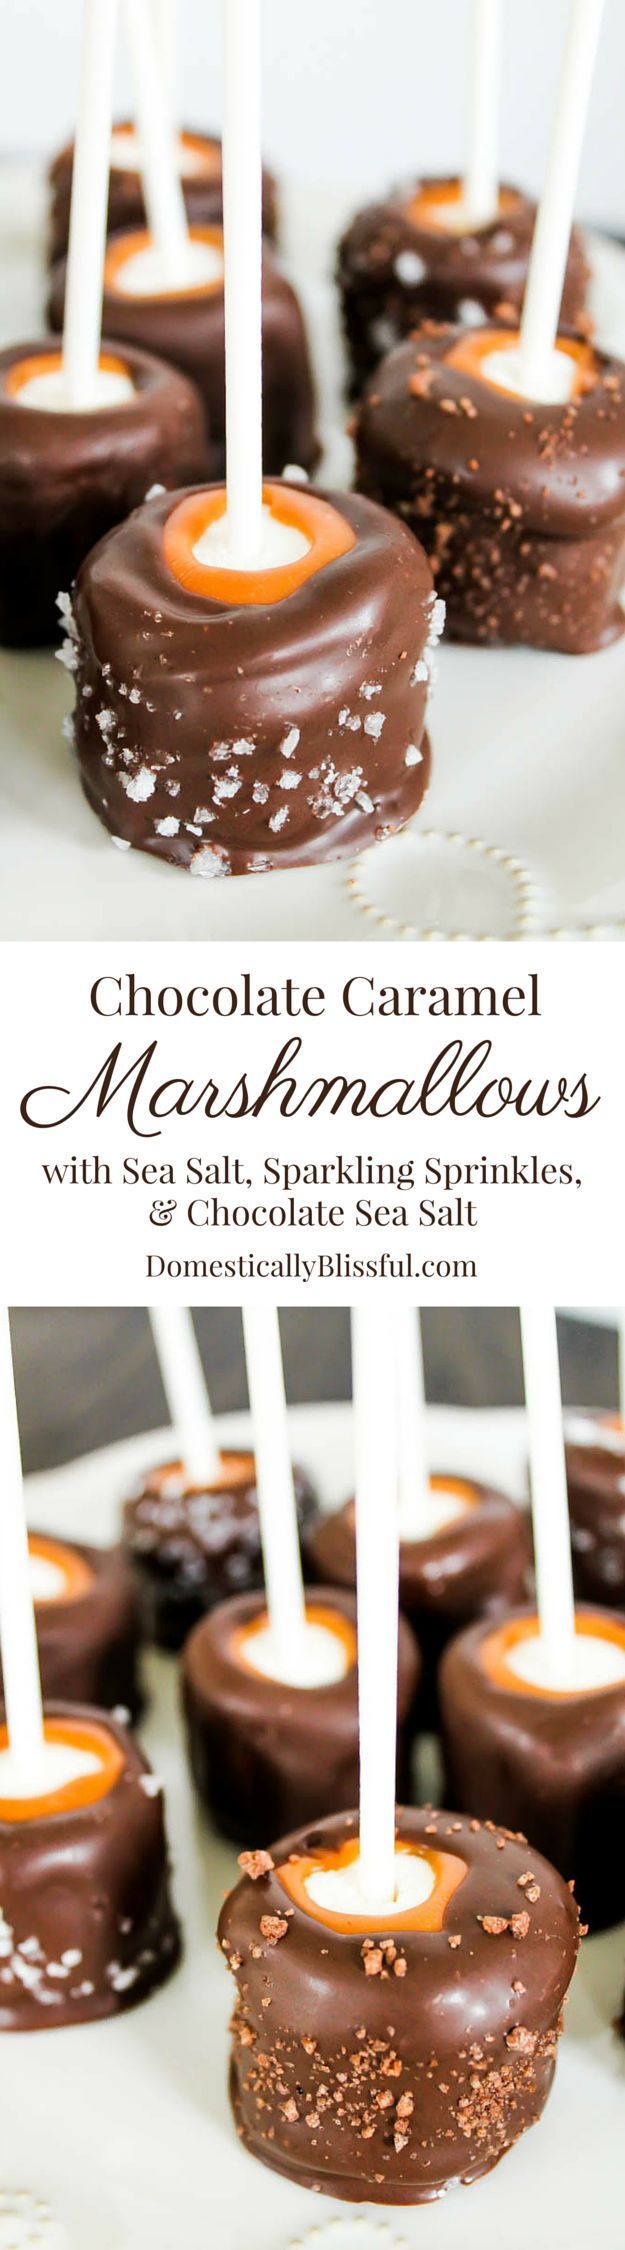 Chocolate Caramel Marshmallows are a delicious sweet treat, especially when sprinkled with sea salt, spark